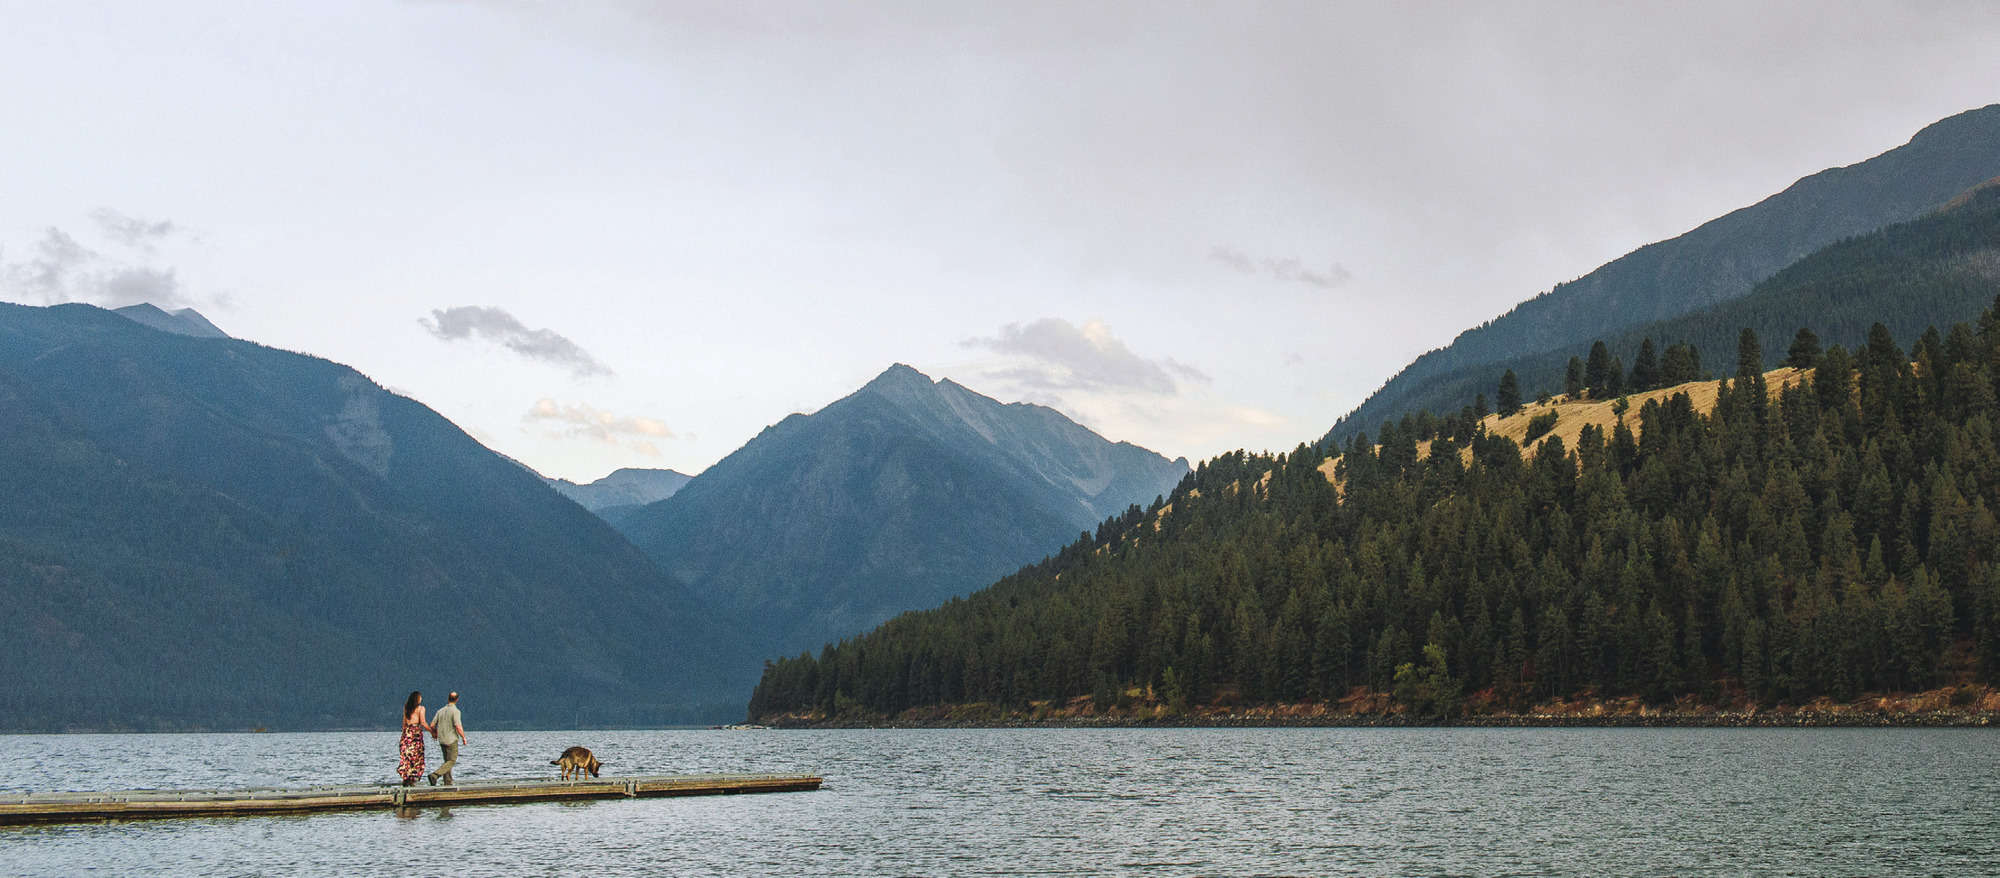 Wallowa Lake in Joseph is a grand getaway for people and dogs.